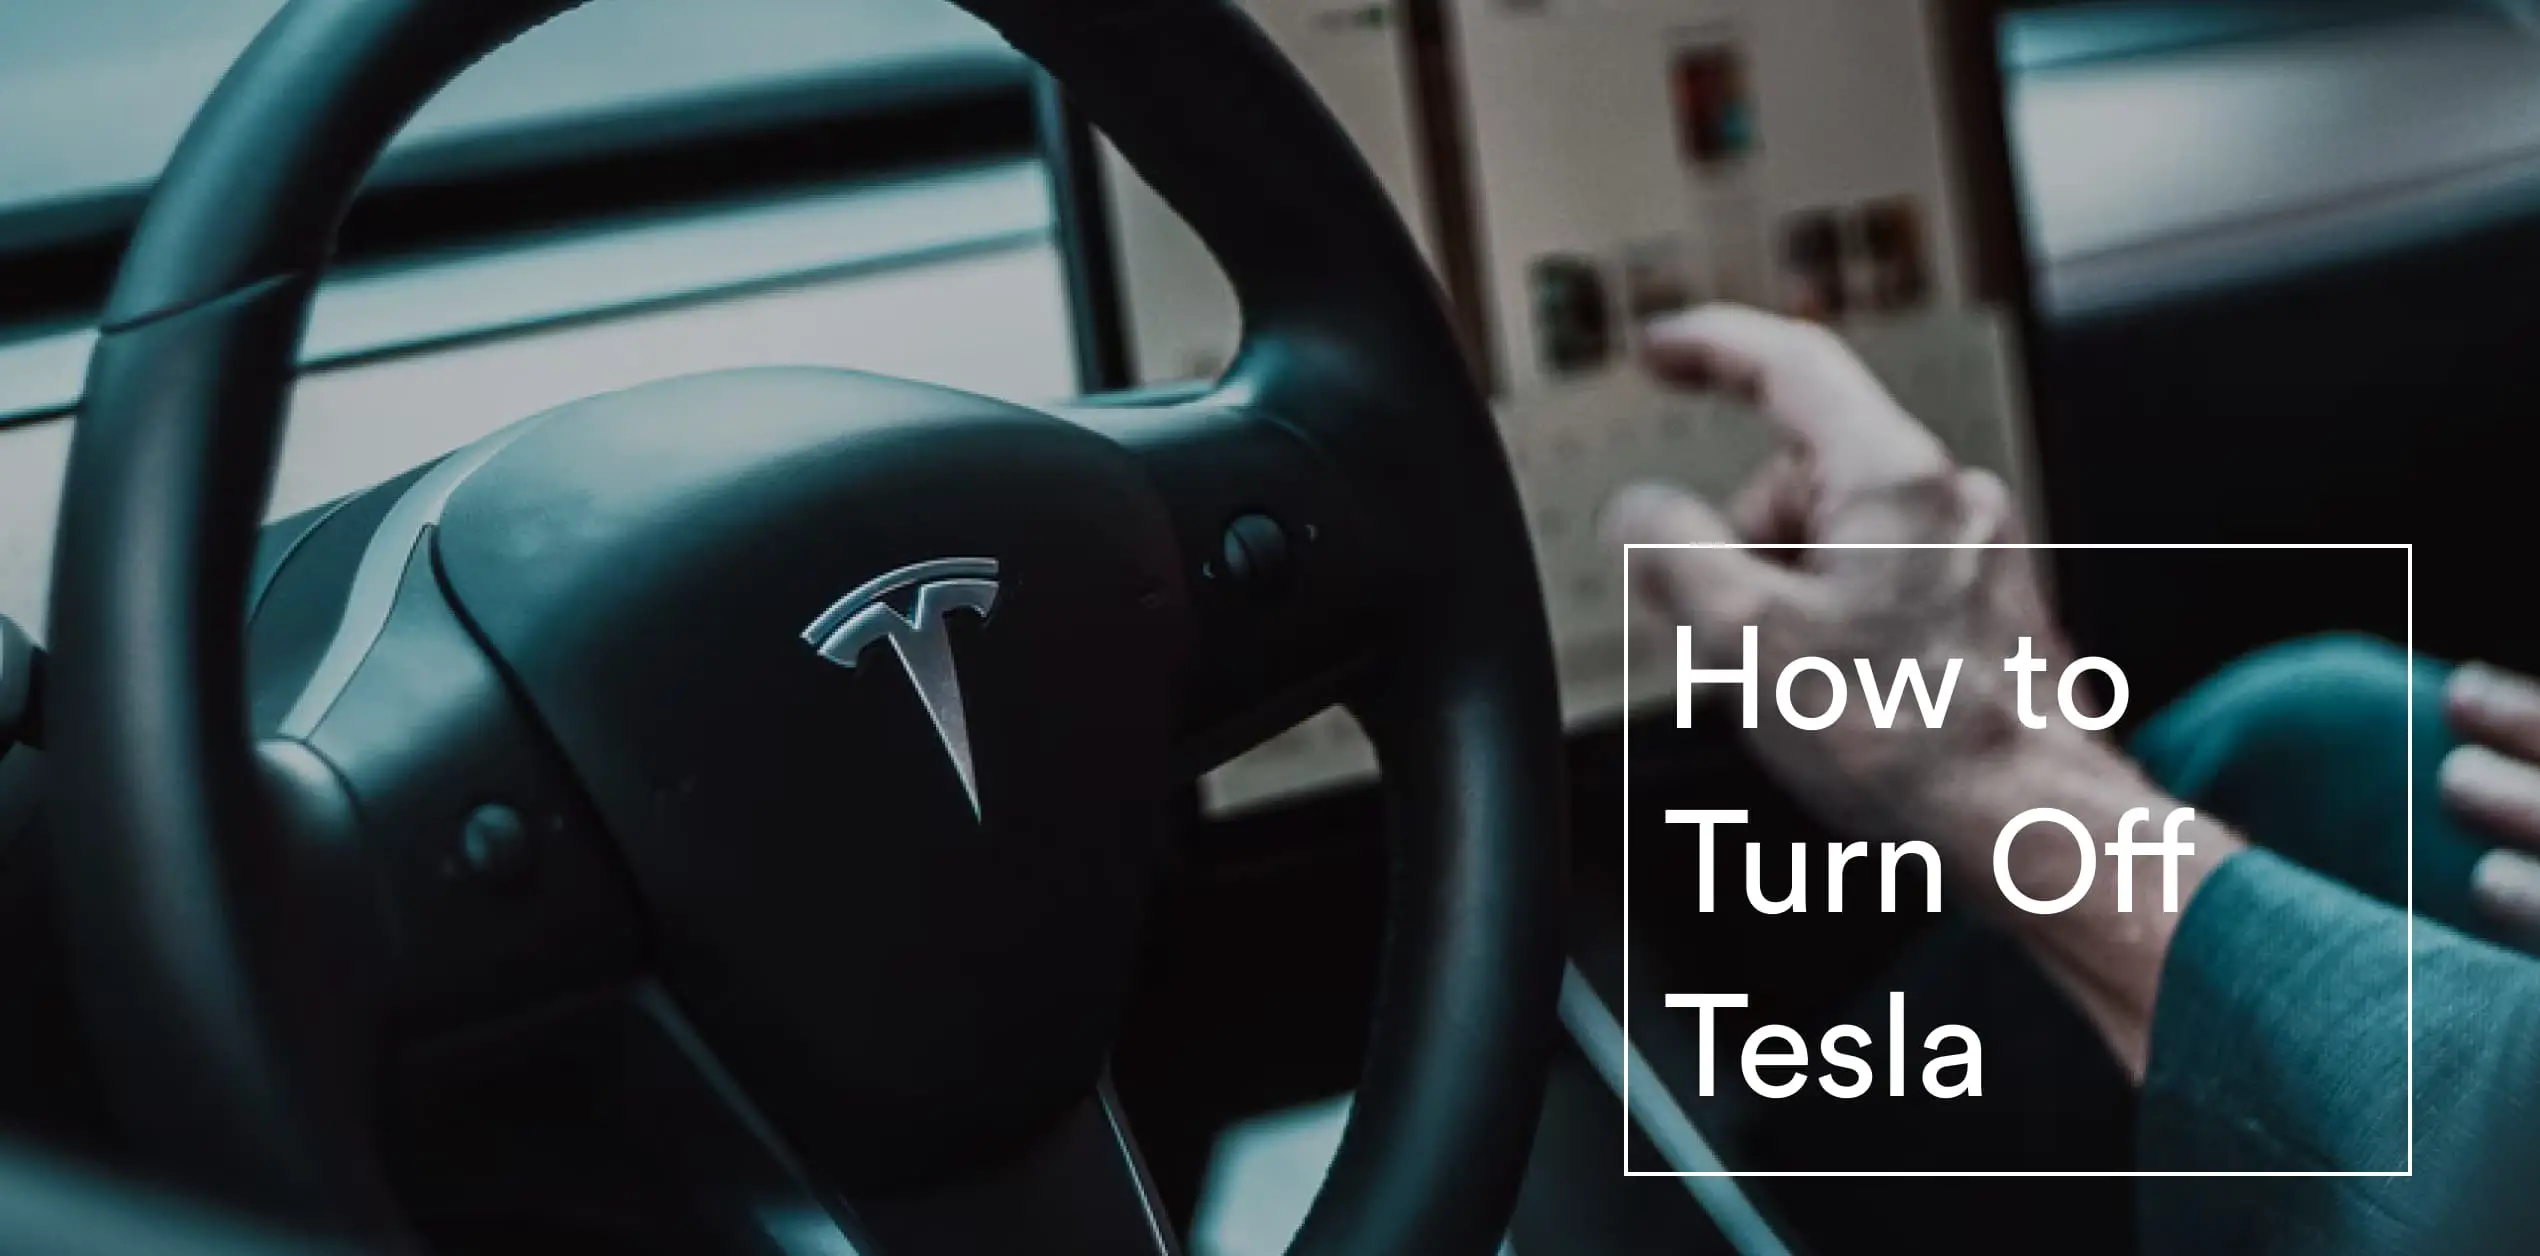 How to Turn Off Tesla?